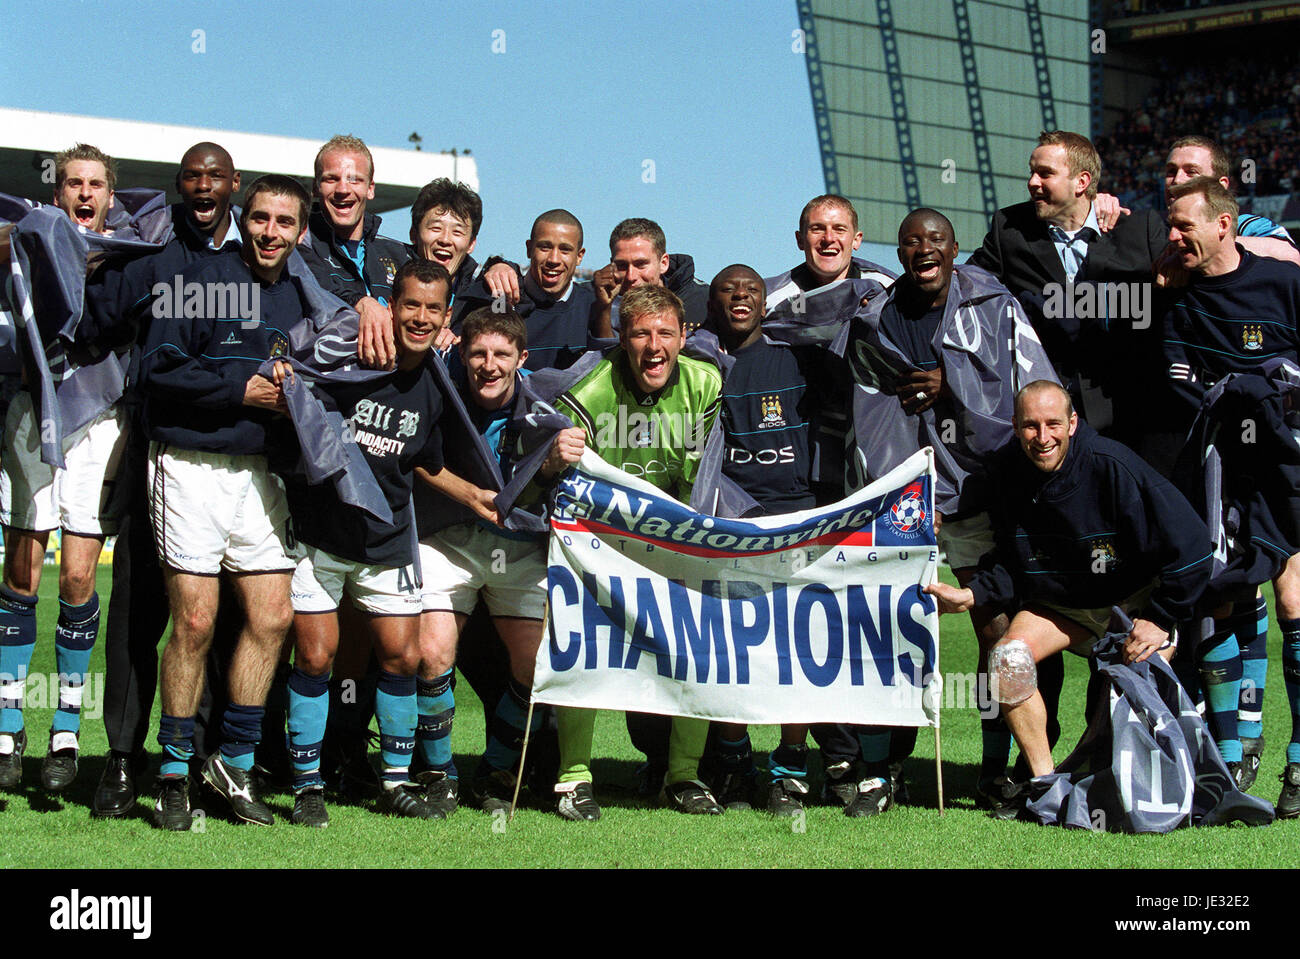 MANCHESTER CITY FC DIVISION 1 CHAMPIONS MAINE ROAD MANCHESTER ENGLAND 6. April 2002 Stockfoto